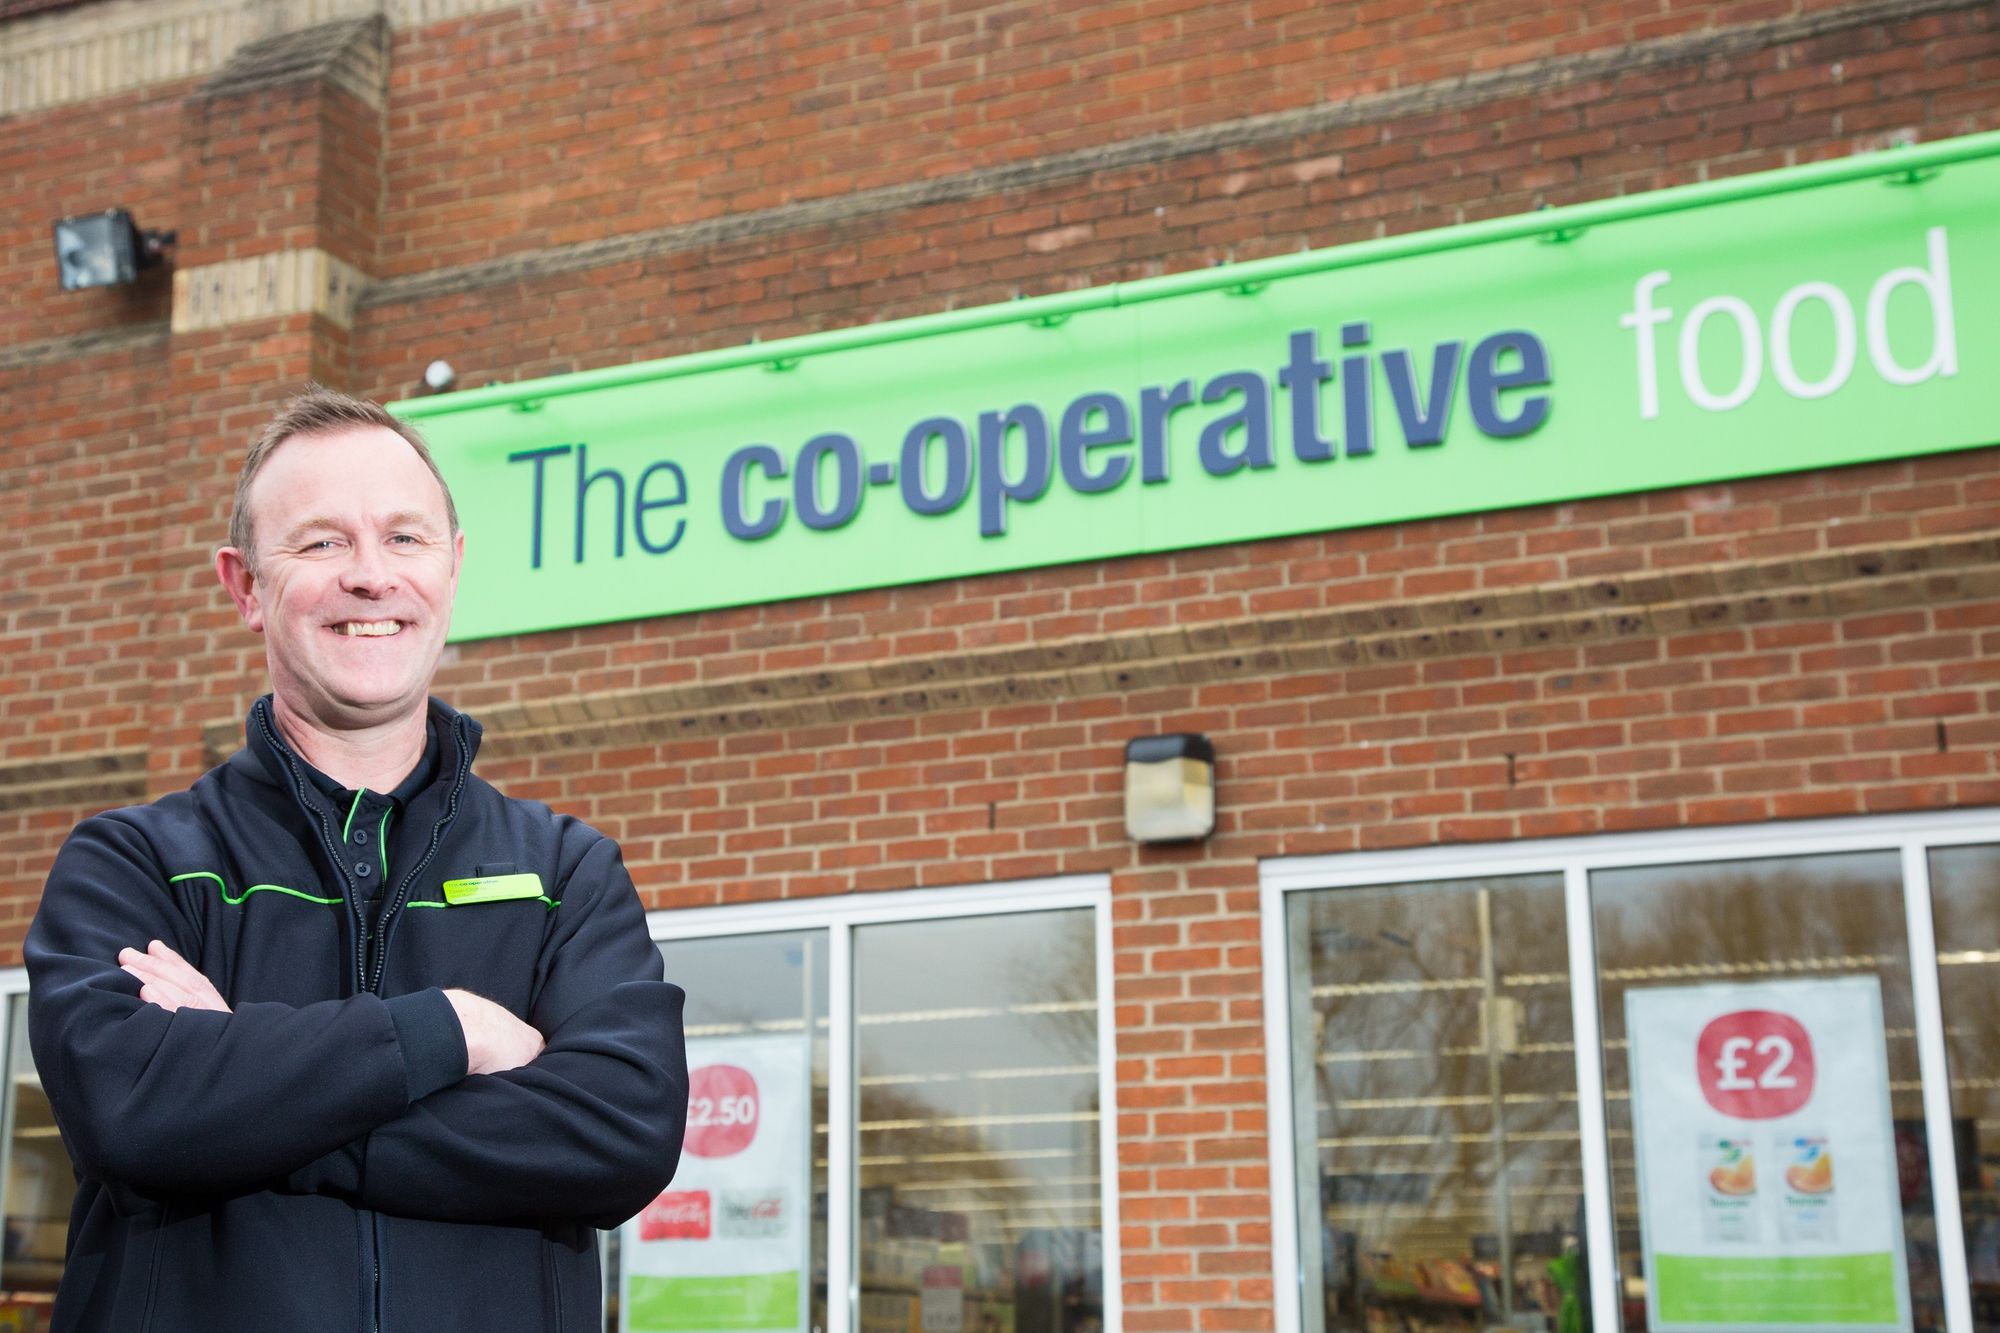 Market Harborough store manager and Board member celebrates hitting 30 years’ service